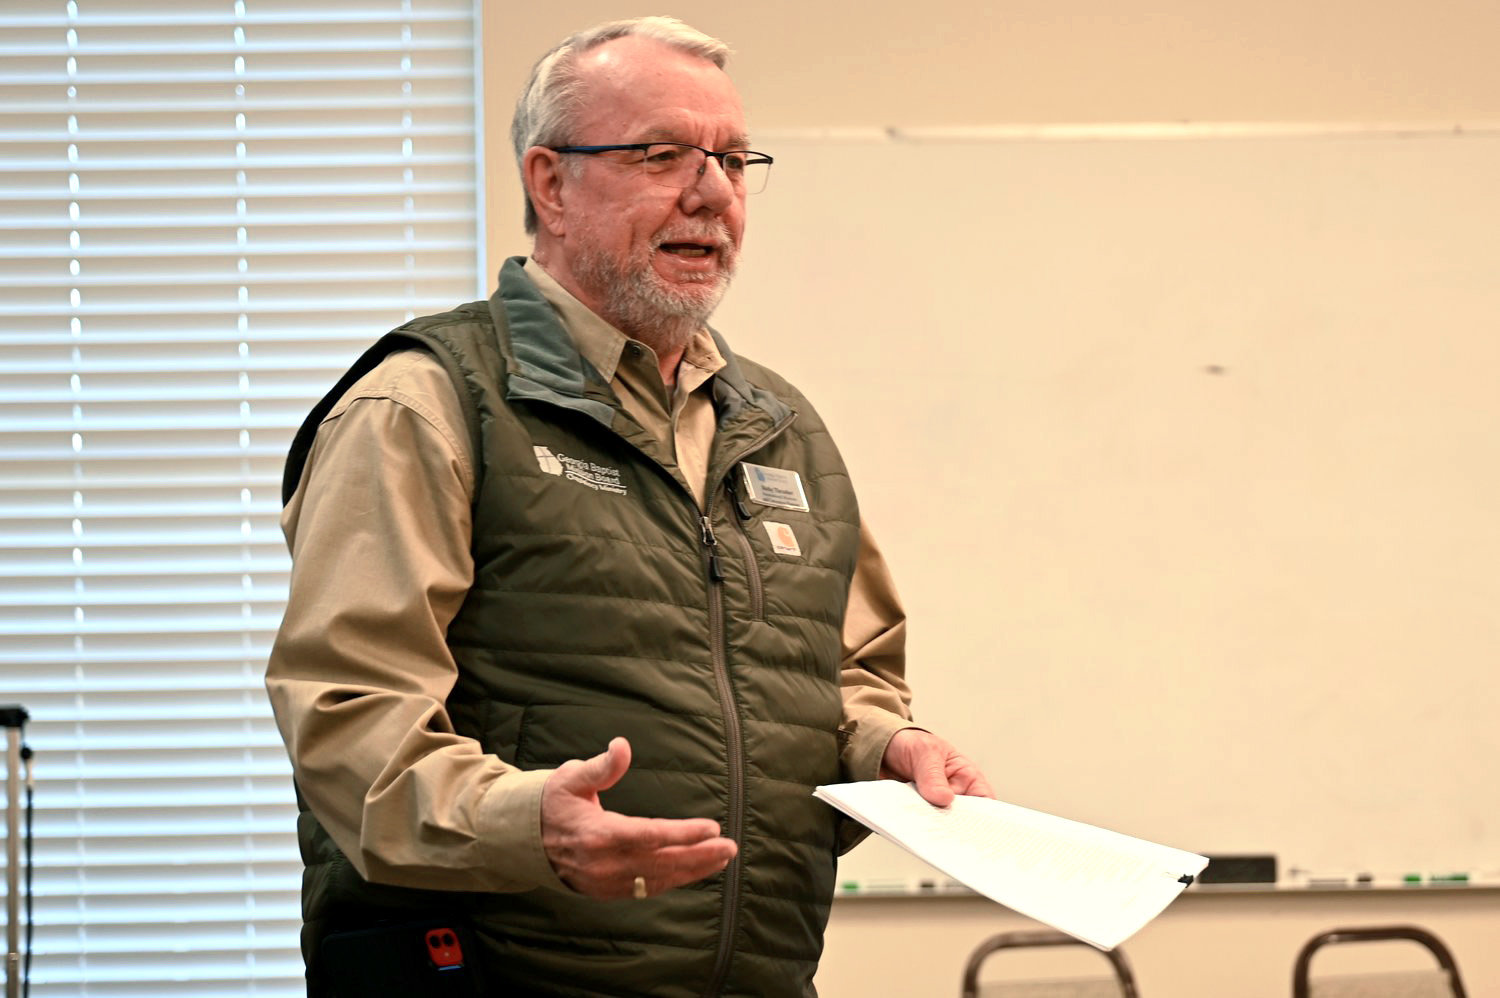 Ricky Thrasher, head of the Georgia Baptist Mission Board's chaplaincy ministry, talks with pastors about methods for reaching senior adults with the gospel. (Index/Roger Alford)